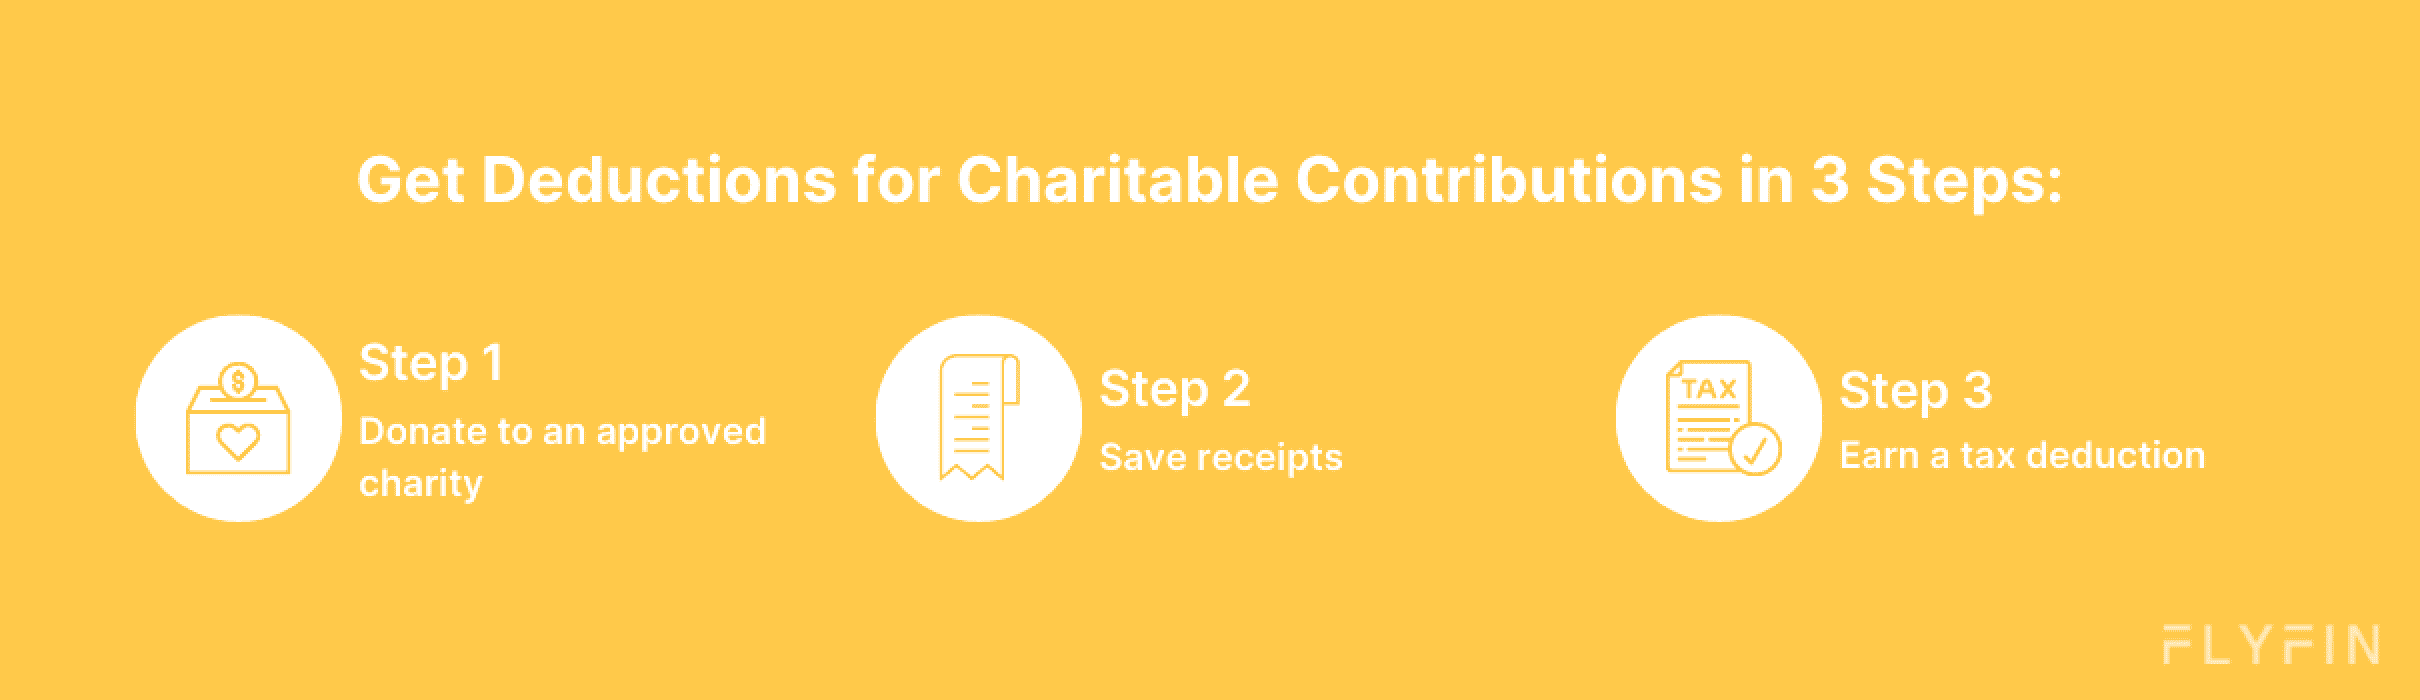 Image with text explaining 3 steps to get tax deductions for charitable contributions - donate to approved charity, save receipts, earn tax deduction.